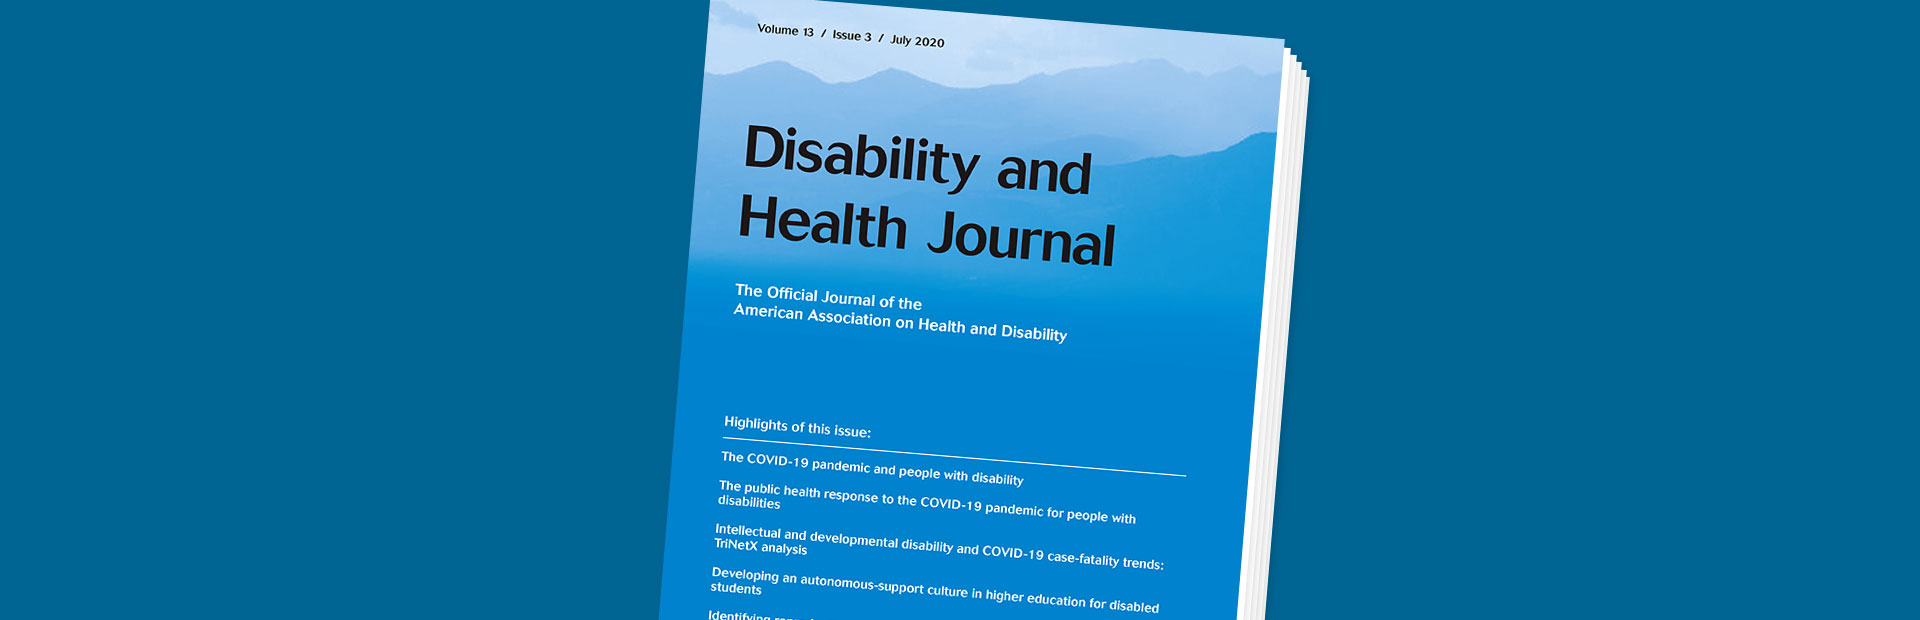 A photo of the Journal cover